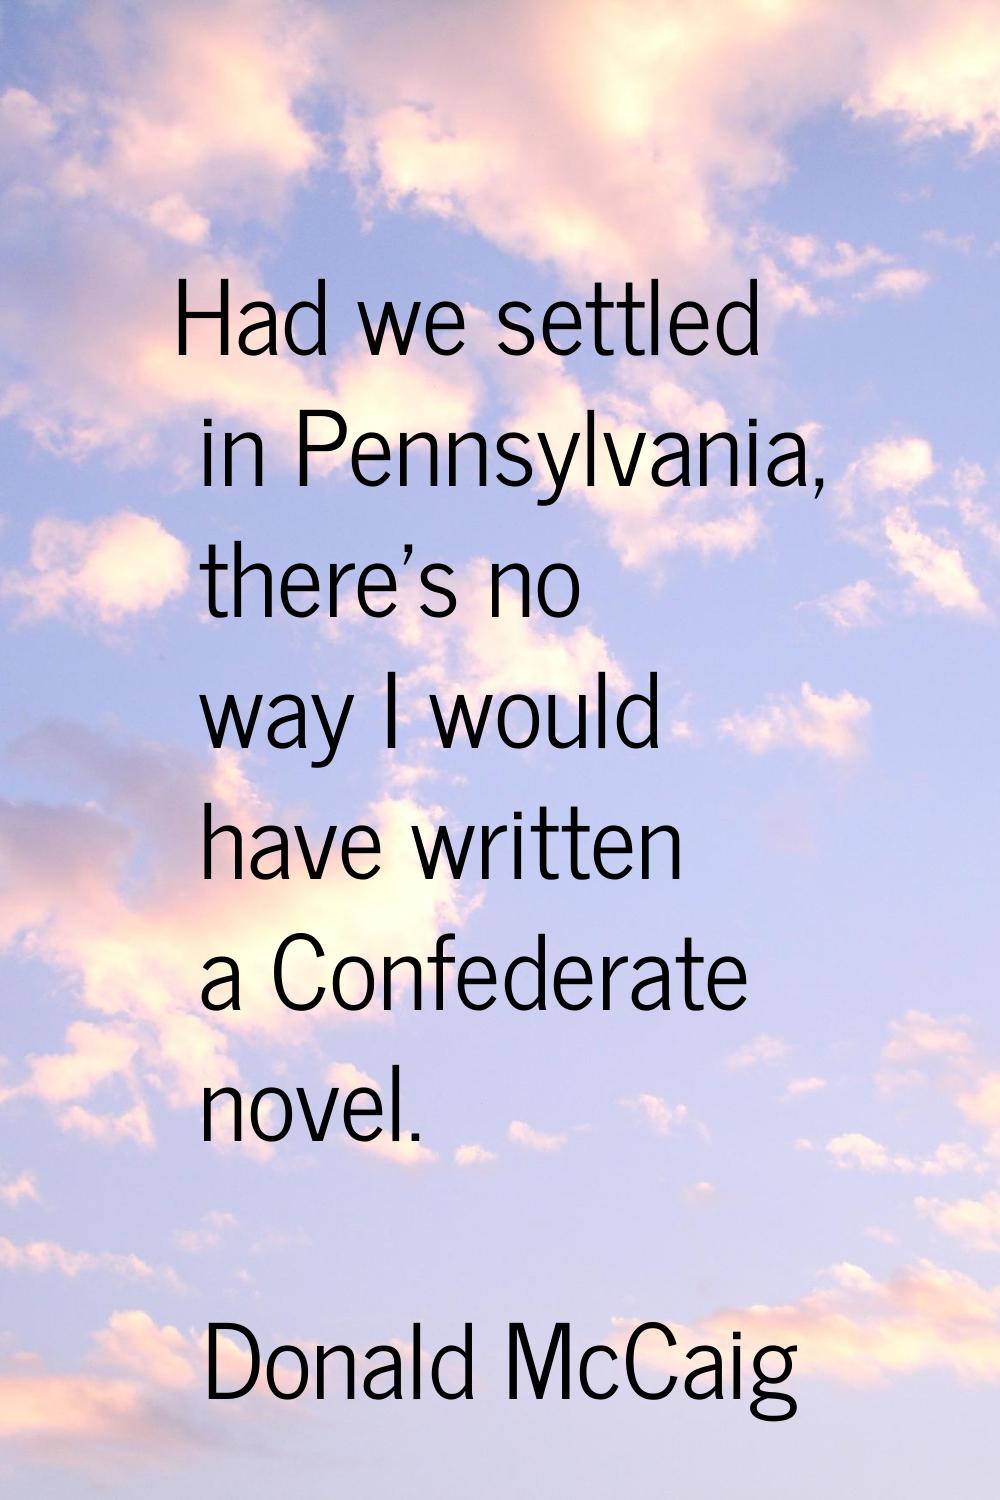 Had we settled in Pennsylvania, there's no way I would have written a Confederate novel.